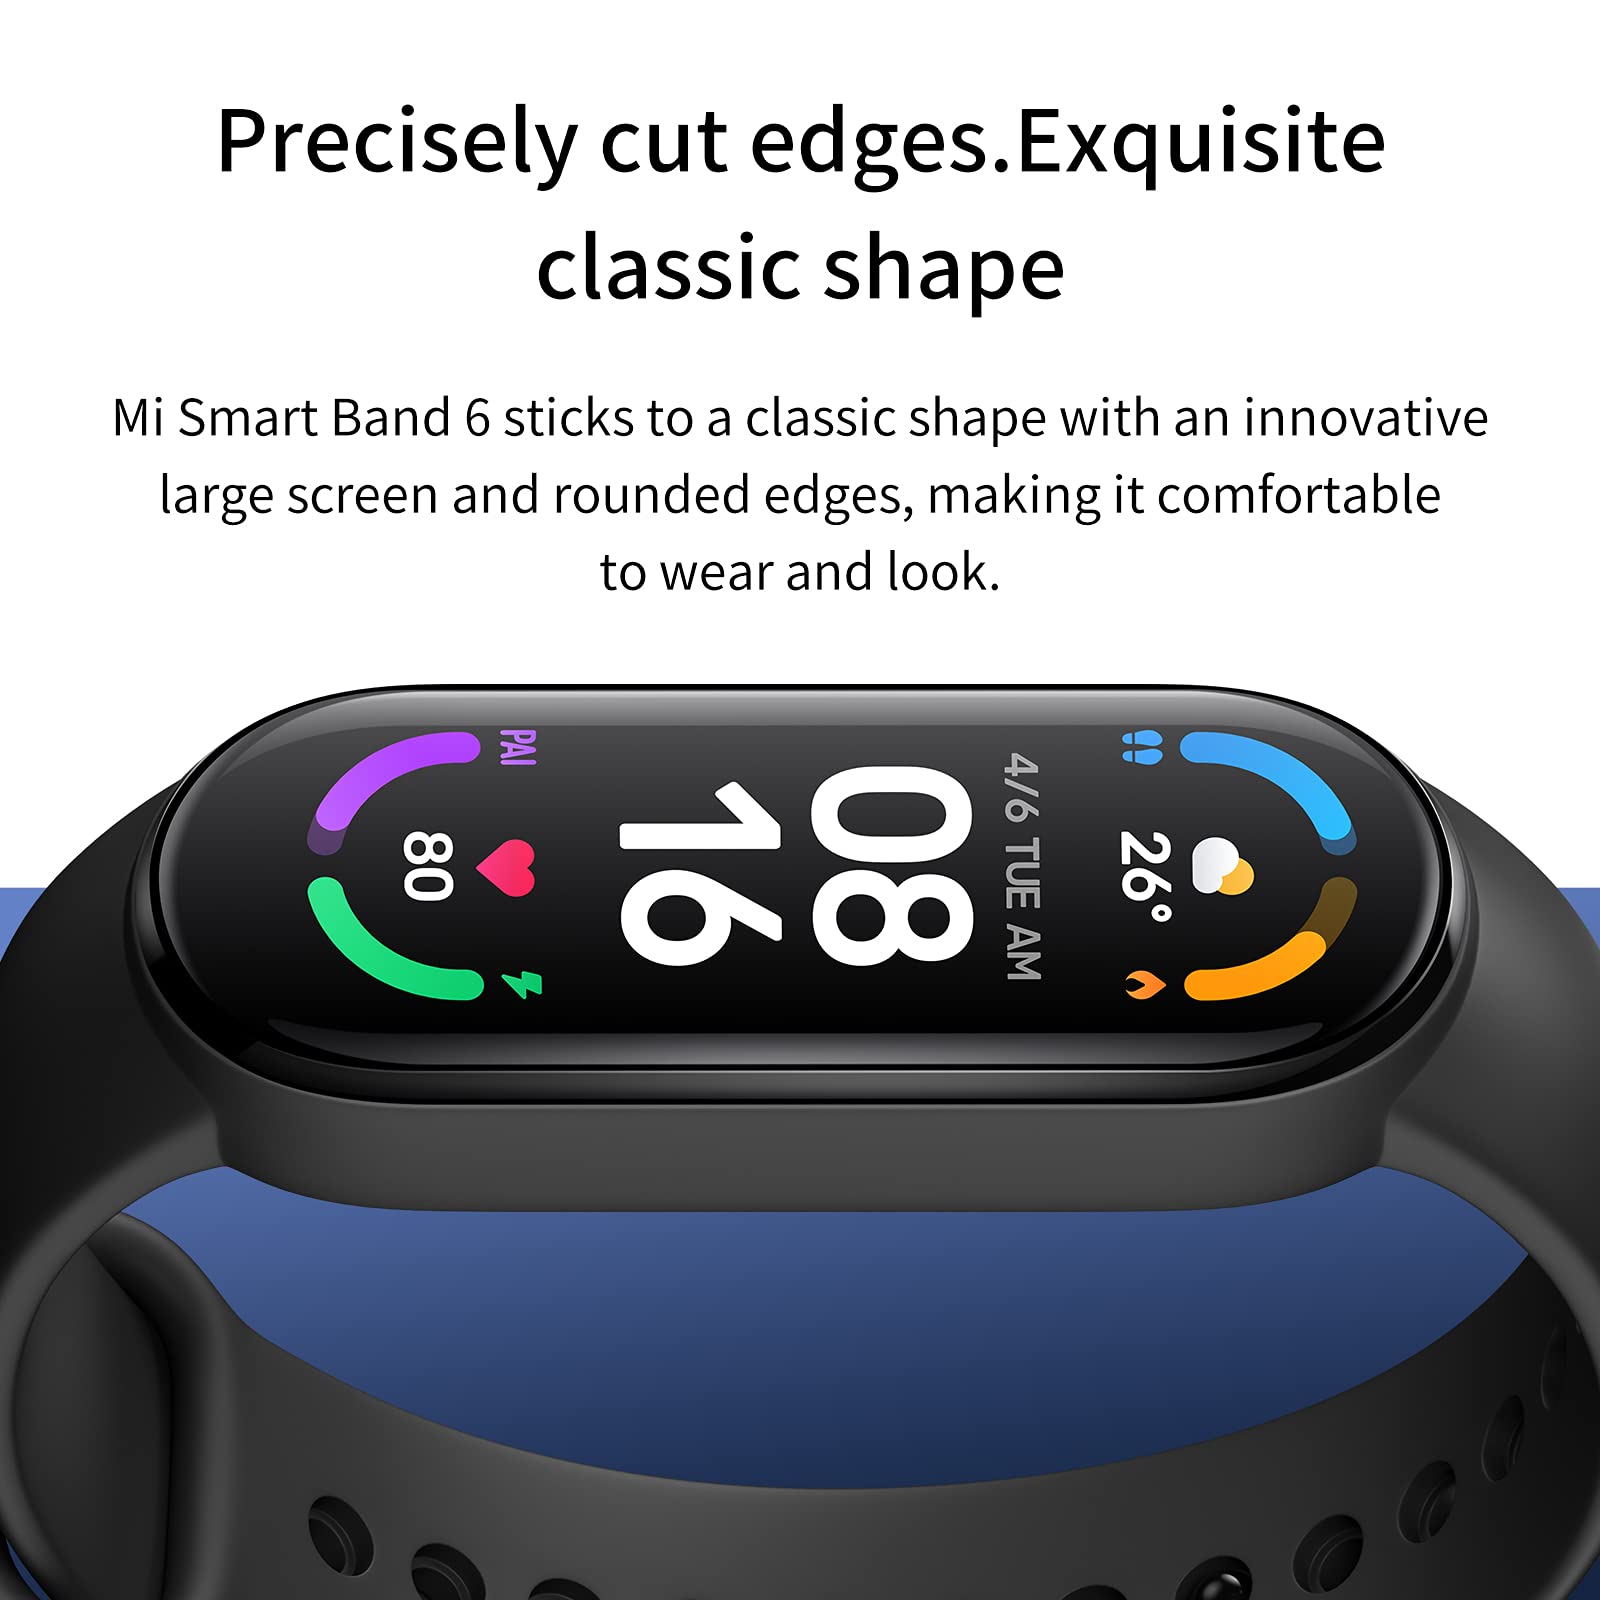 Xiaomi Mi Band 6, Smart Band 6 Global Version Activity Bracelet, Blood Oxygen Detection, Heart Rate Monitor, Sleep Monitor, 1.56" AMOLED Color Screen 5 ATM